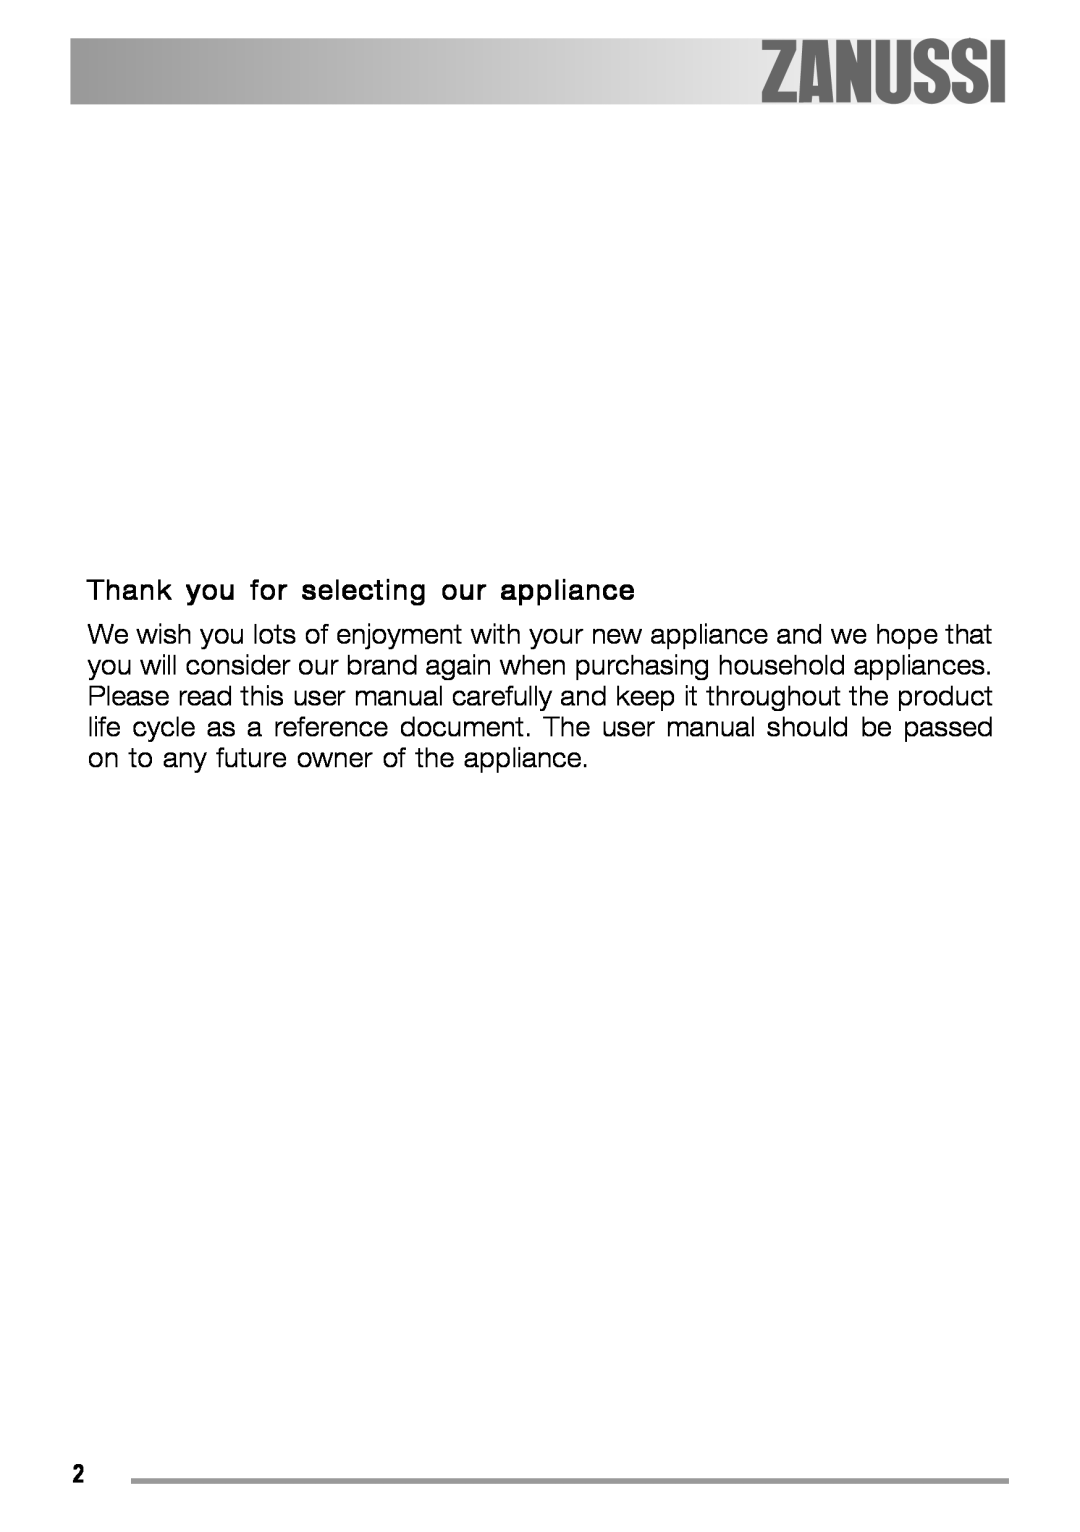 Zanussi ZGF 780 IT manual Thank you for selecting our appliance 